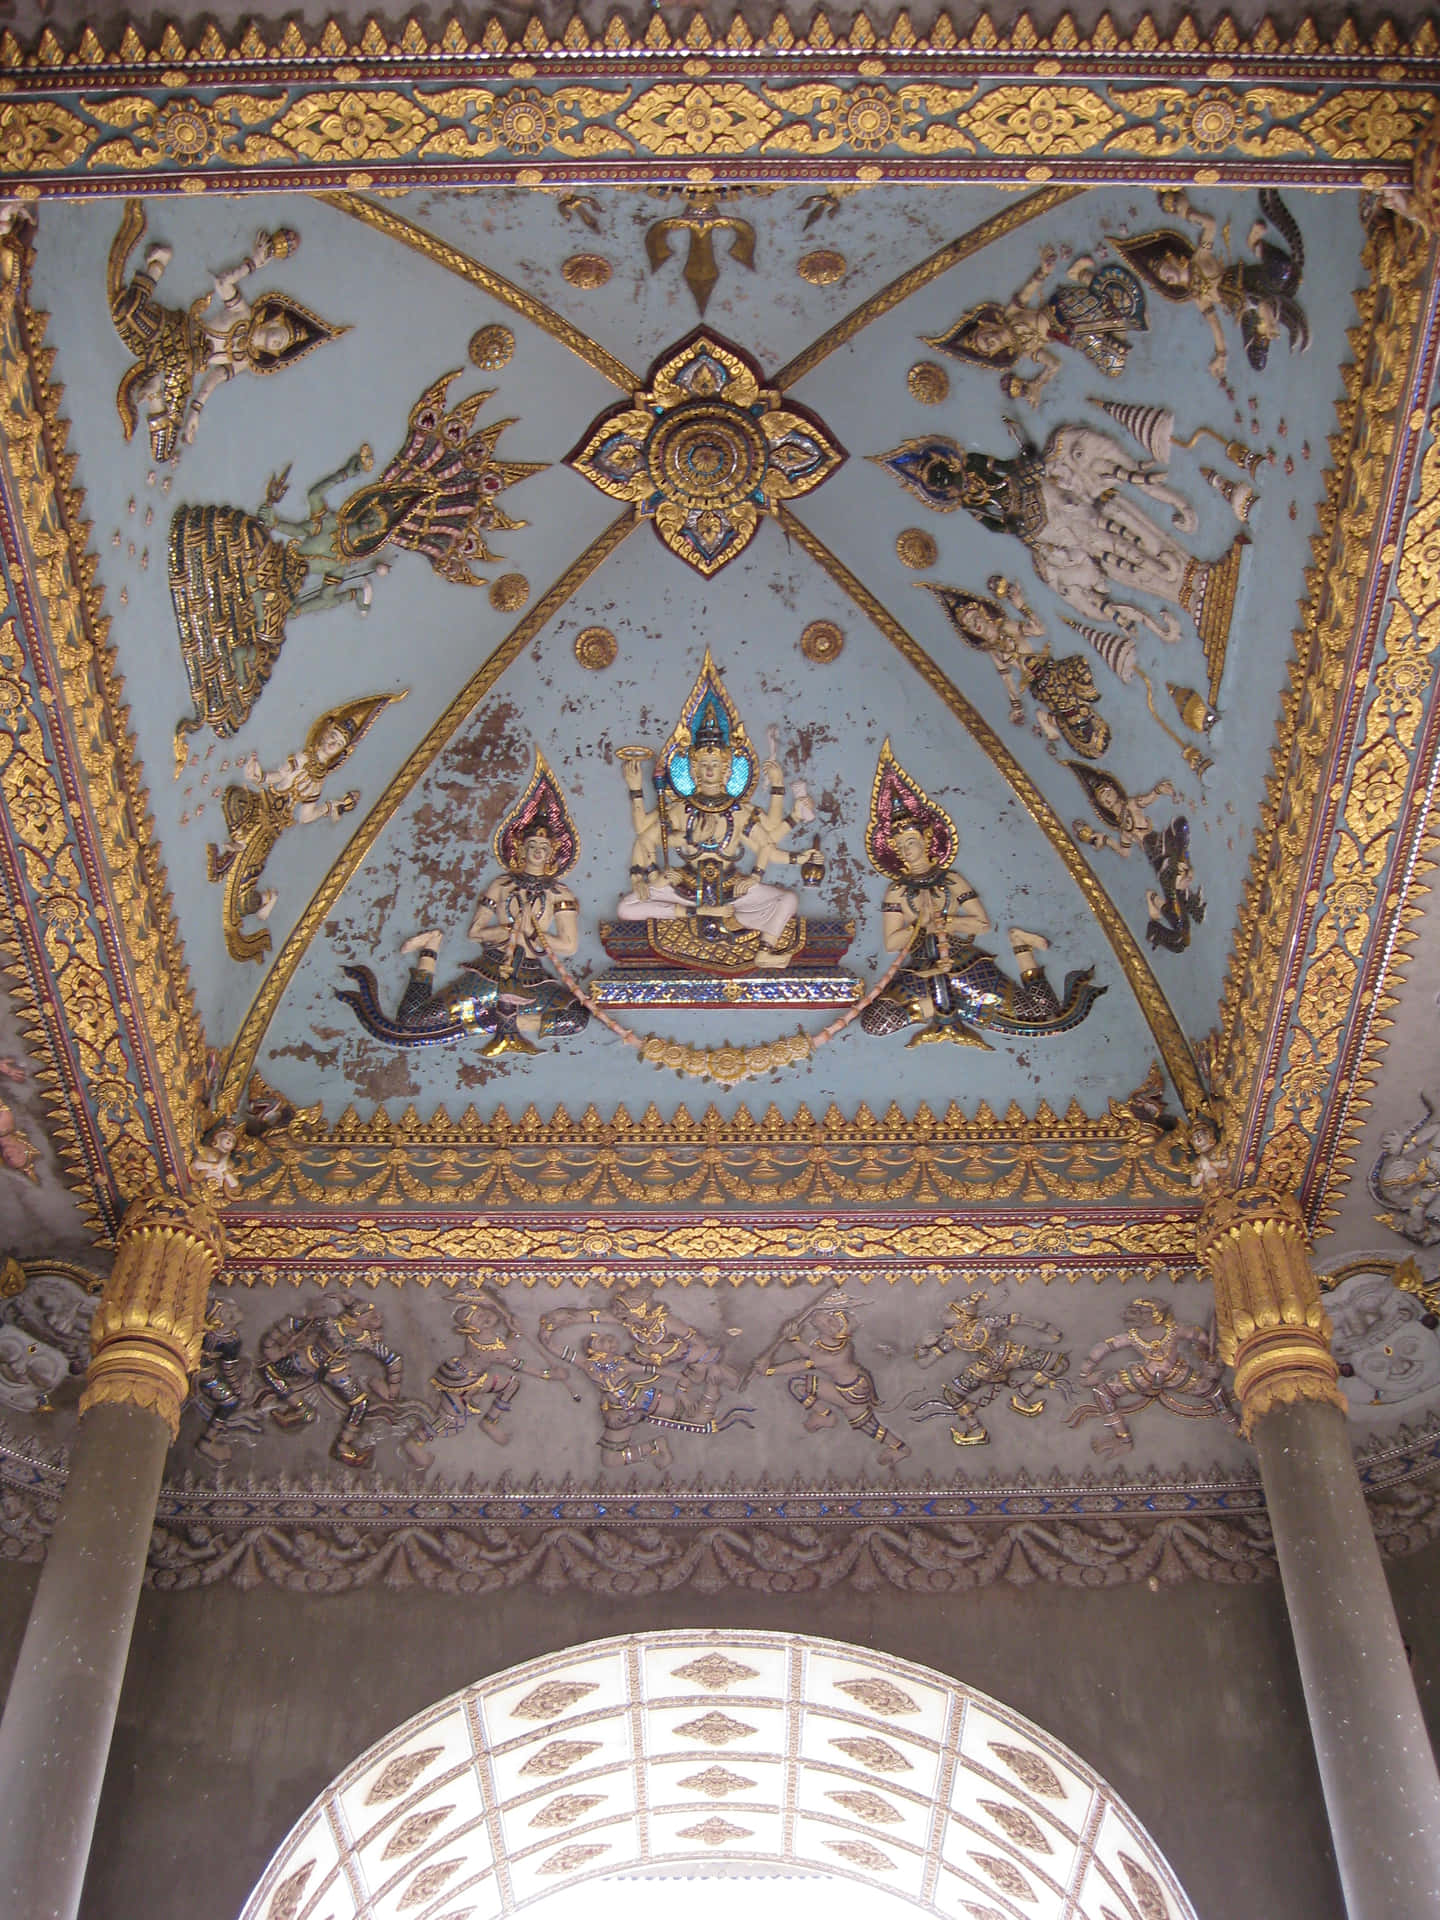 Majestic Ceiling Artistry of Pataxui War Monument in Laos Wallpaper